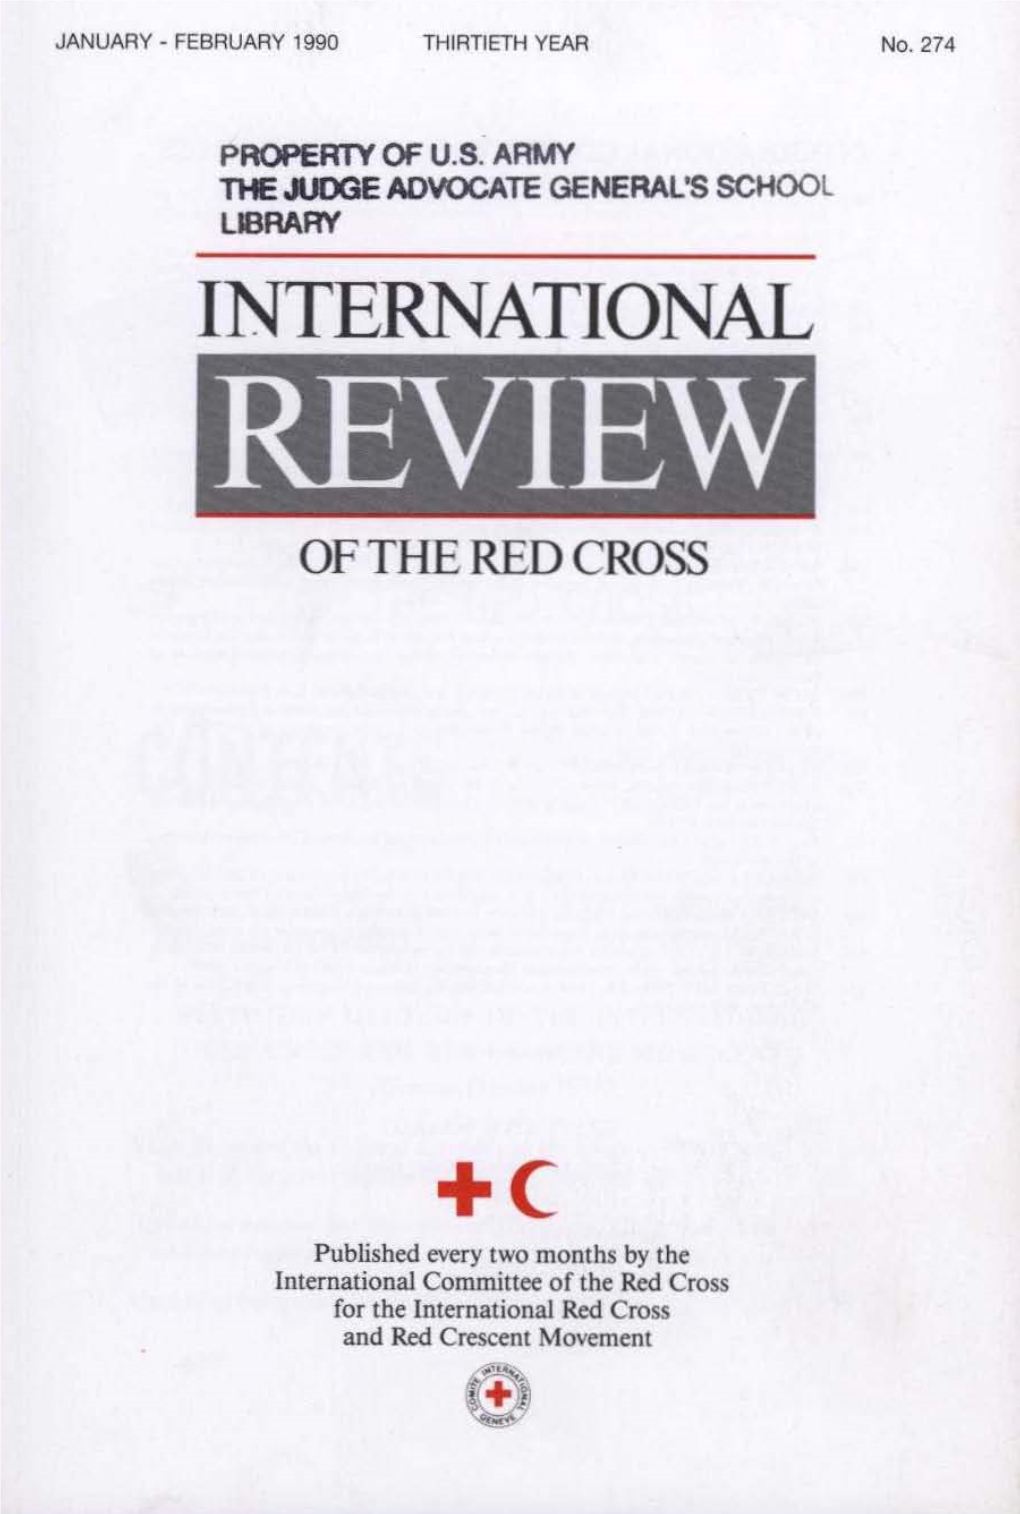 International Review of the Red Cross, January-February 1990